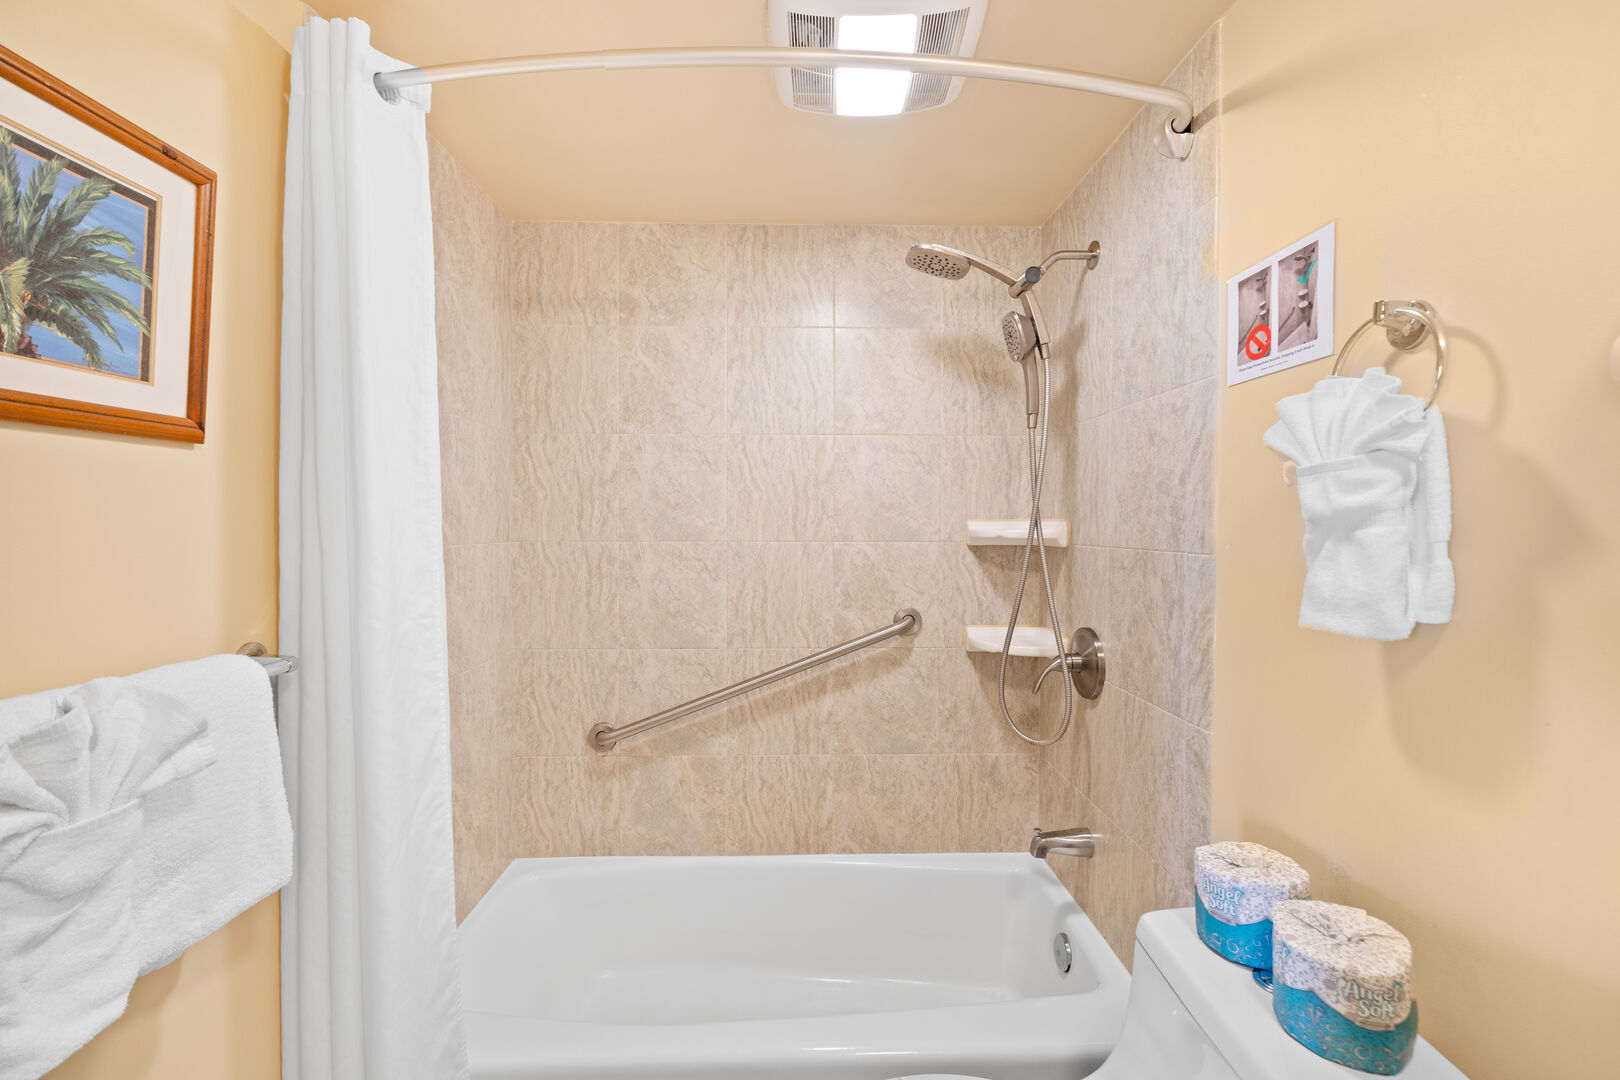 The unit has a full bathroom with tub and shower combination!